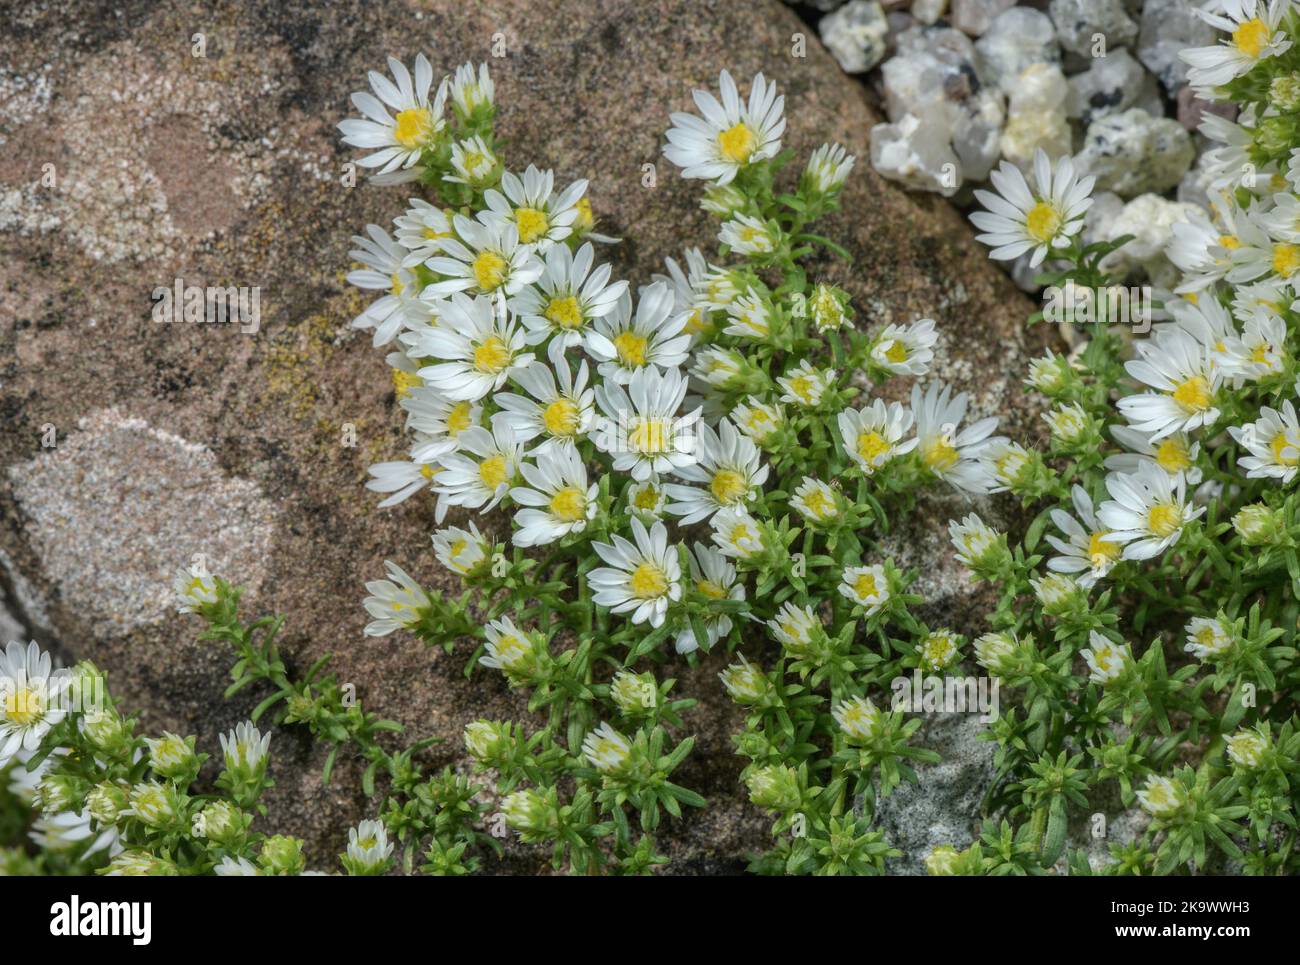 White heath aster, Symphyotrichum ericoides, in flower. From the USA. Stock Photo